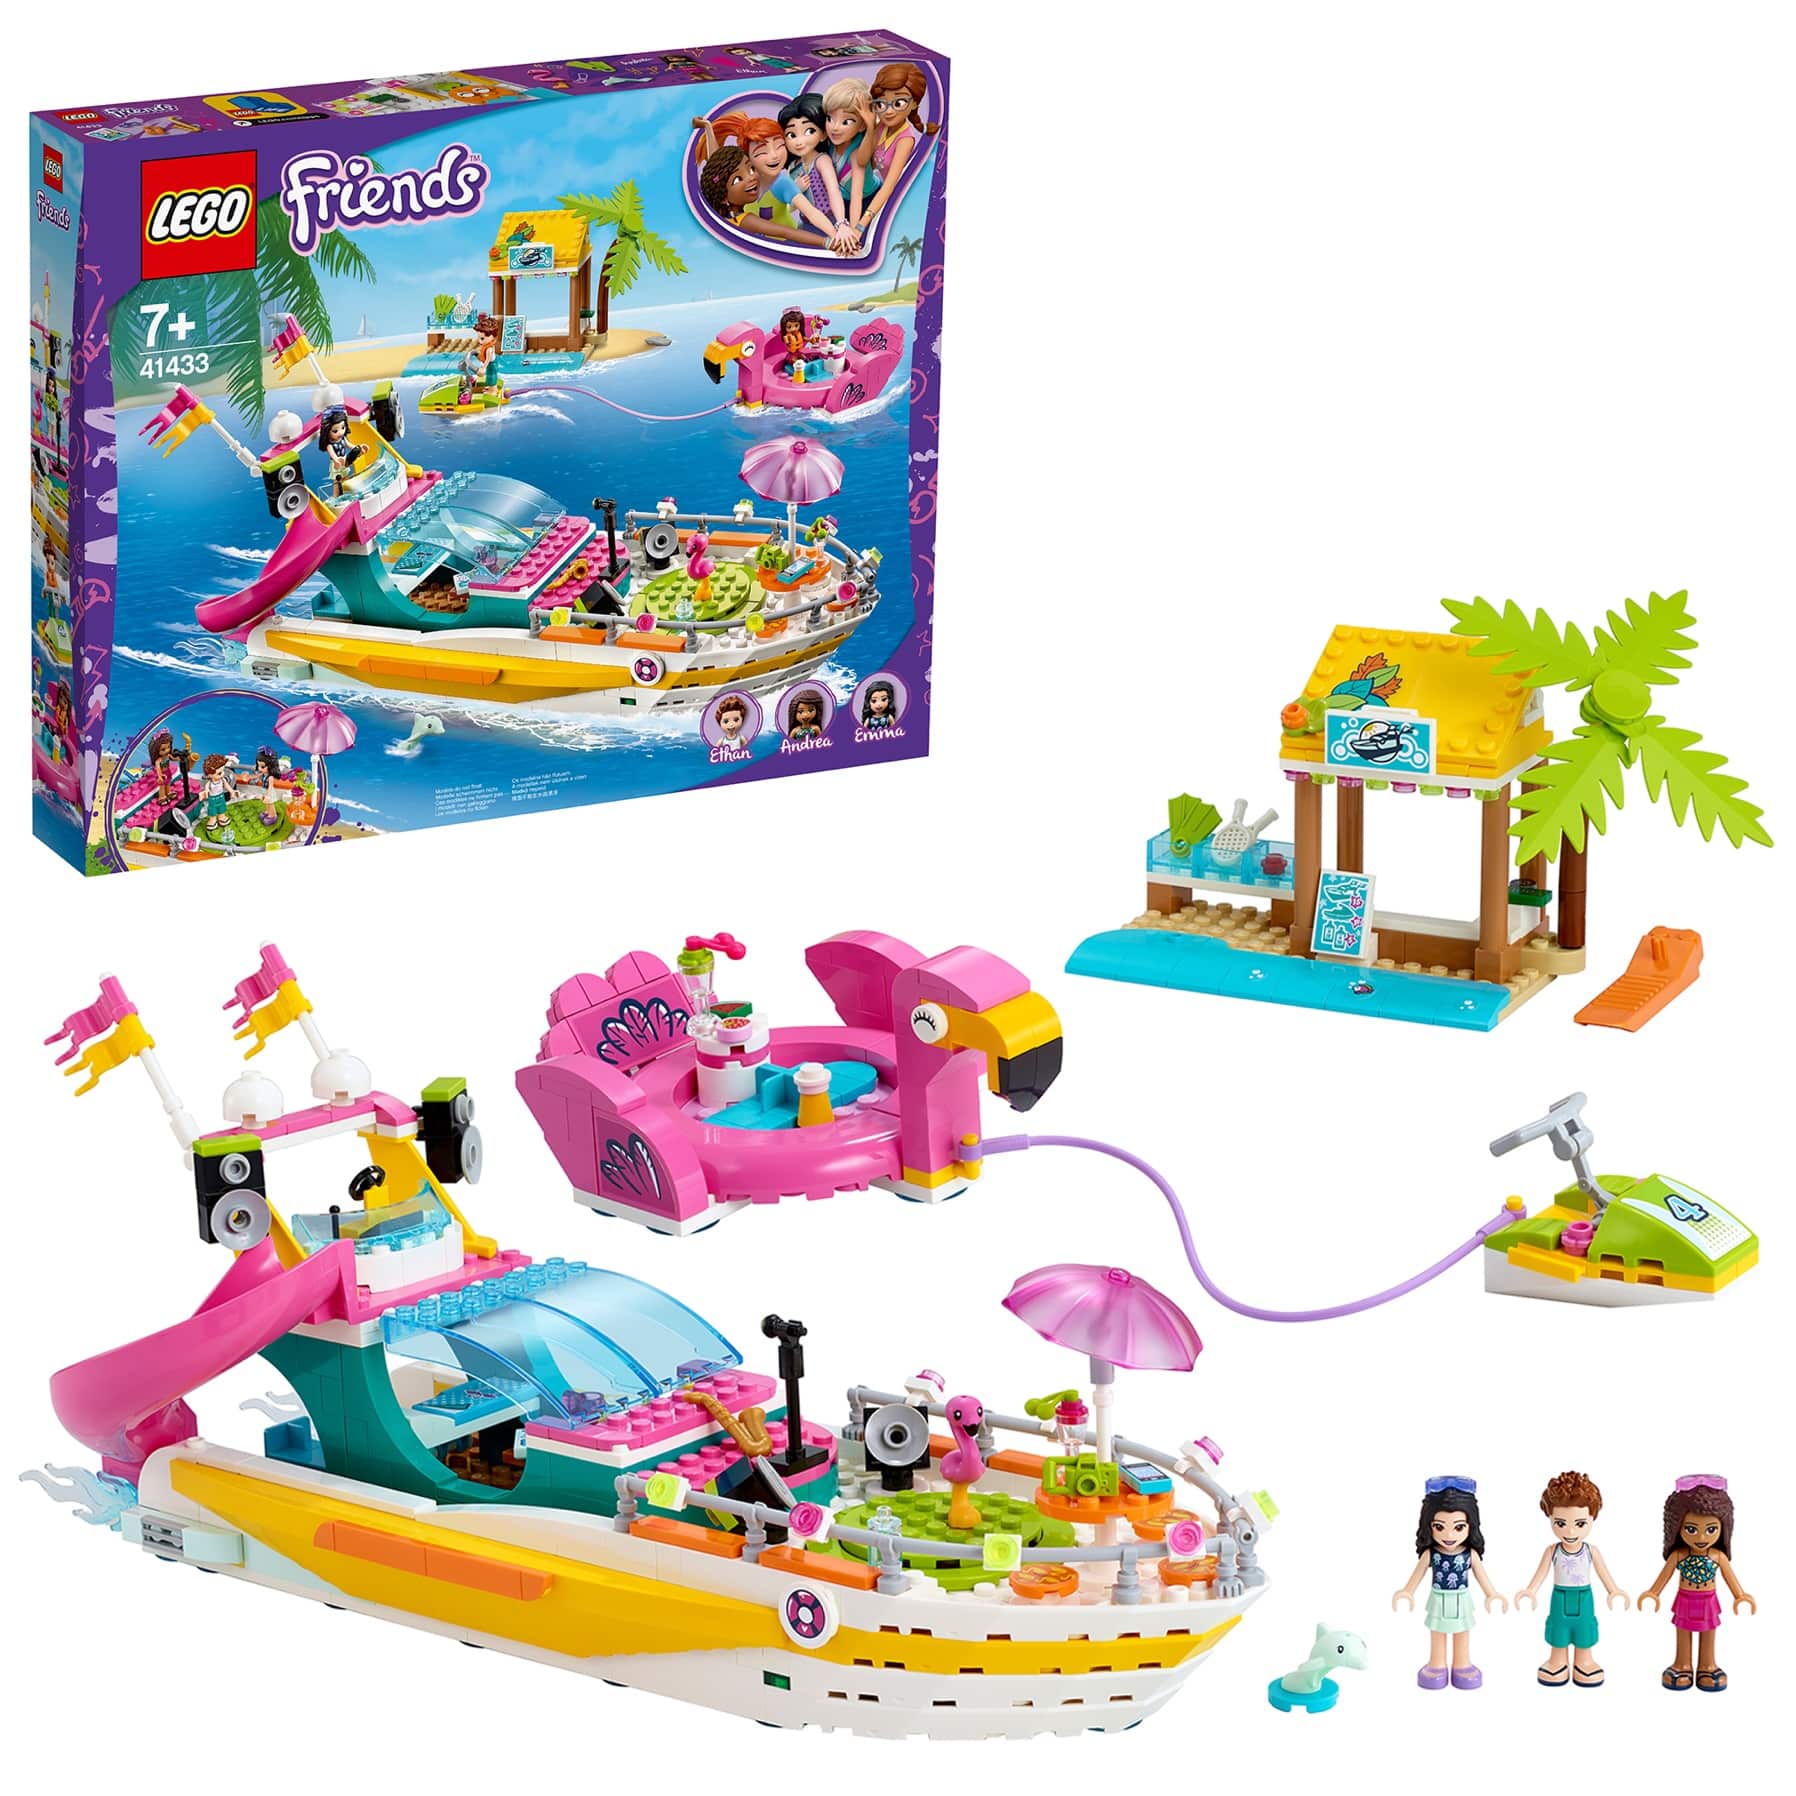 Buy LEGO Dubai the Friends Pieces) Online UAE|Toys & in Us (640 Boat Party \'R